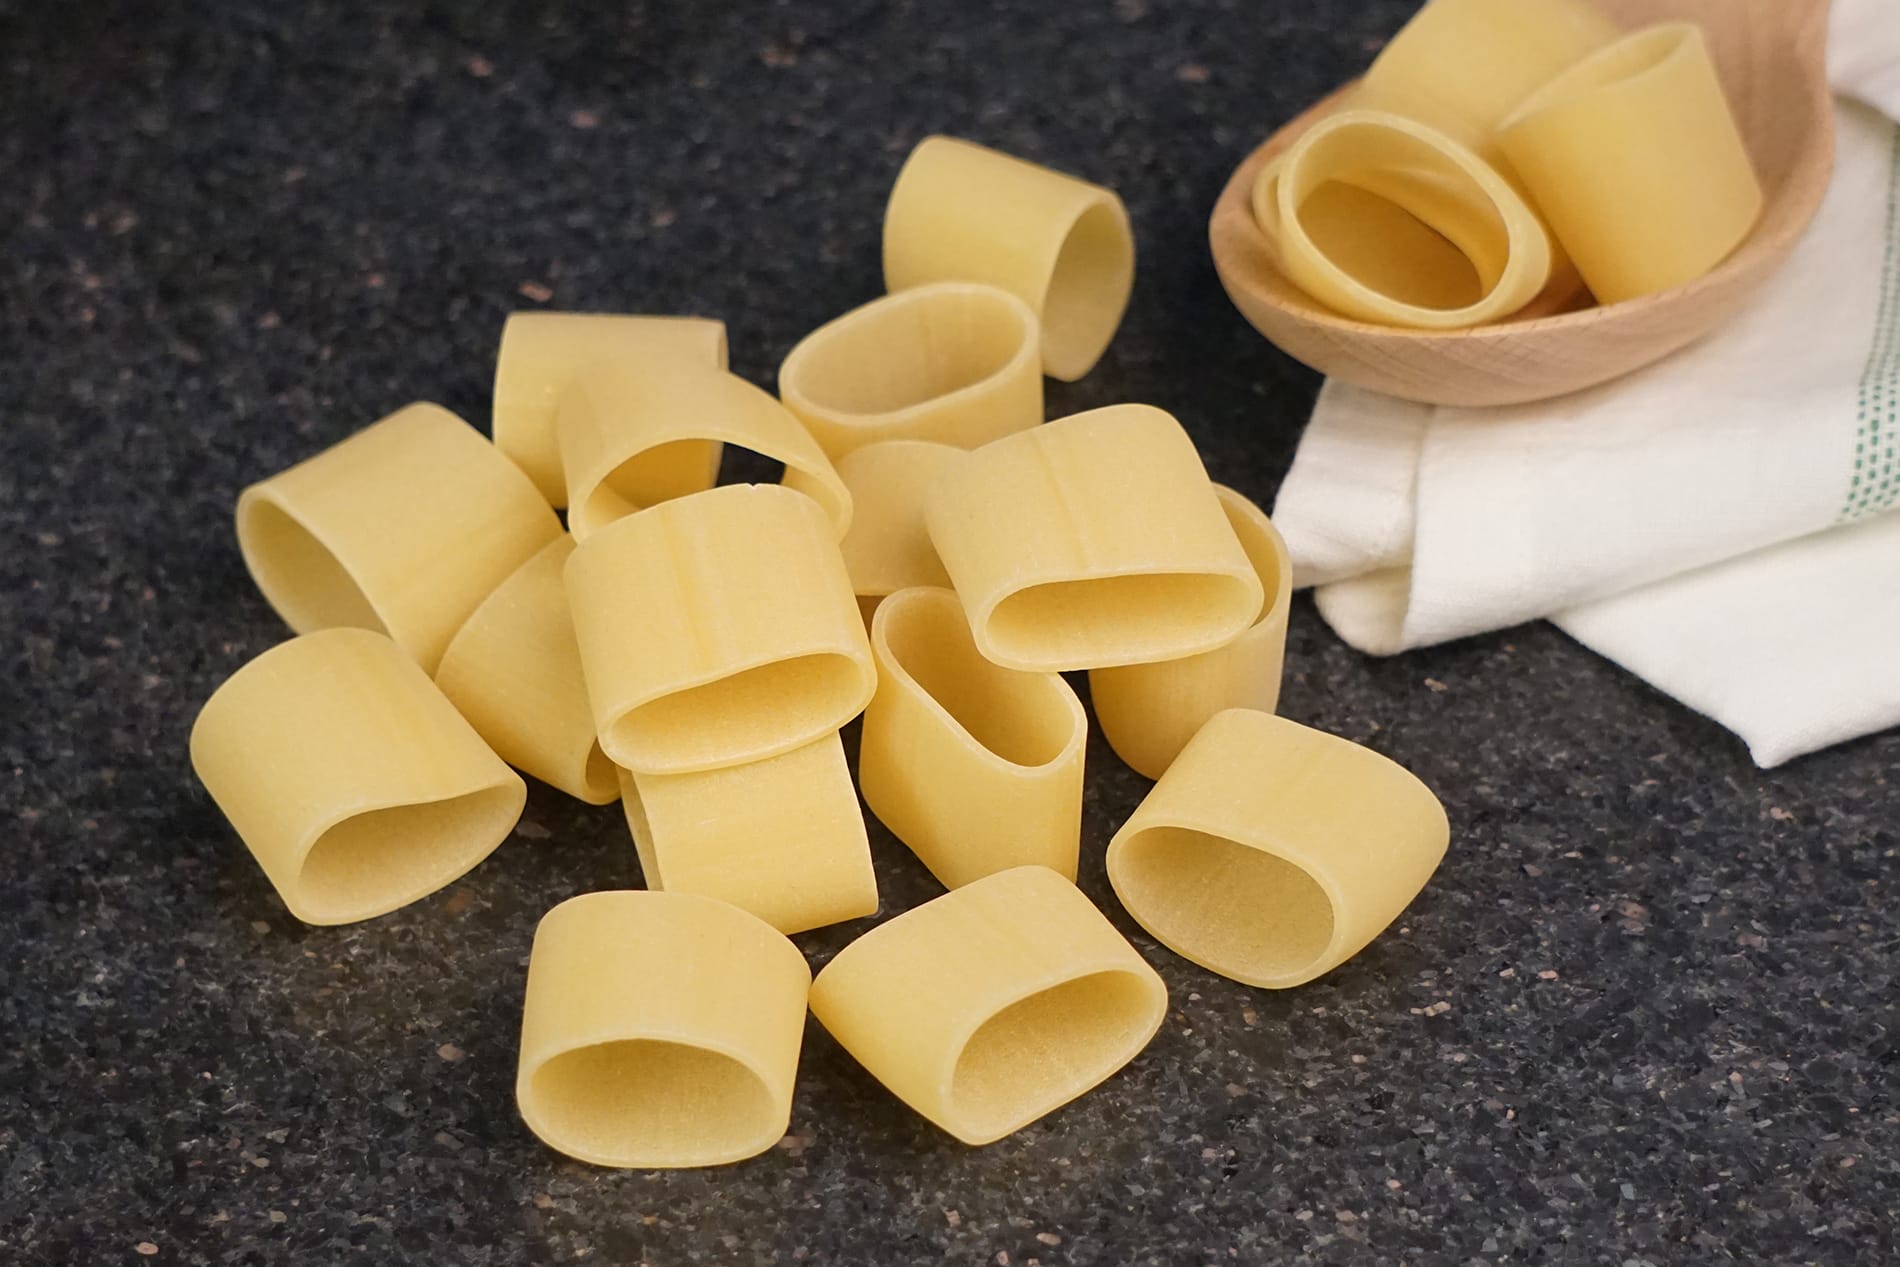 Pasta Shapes | Share the Pasta